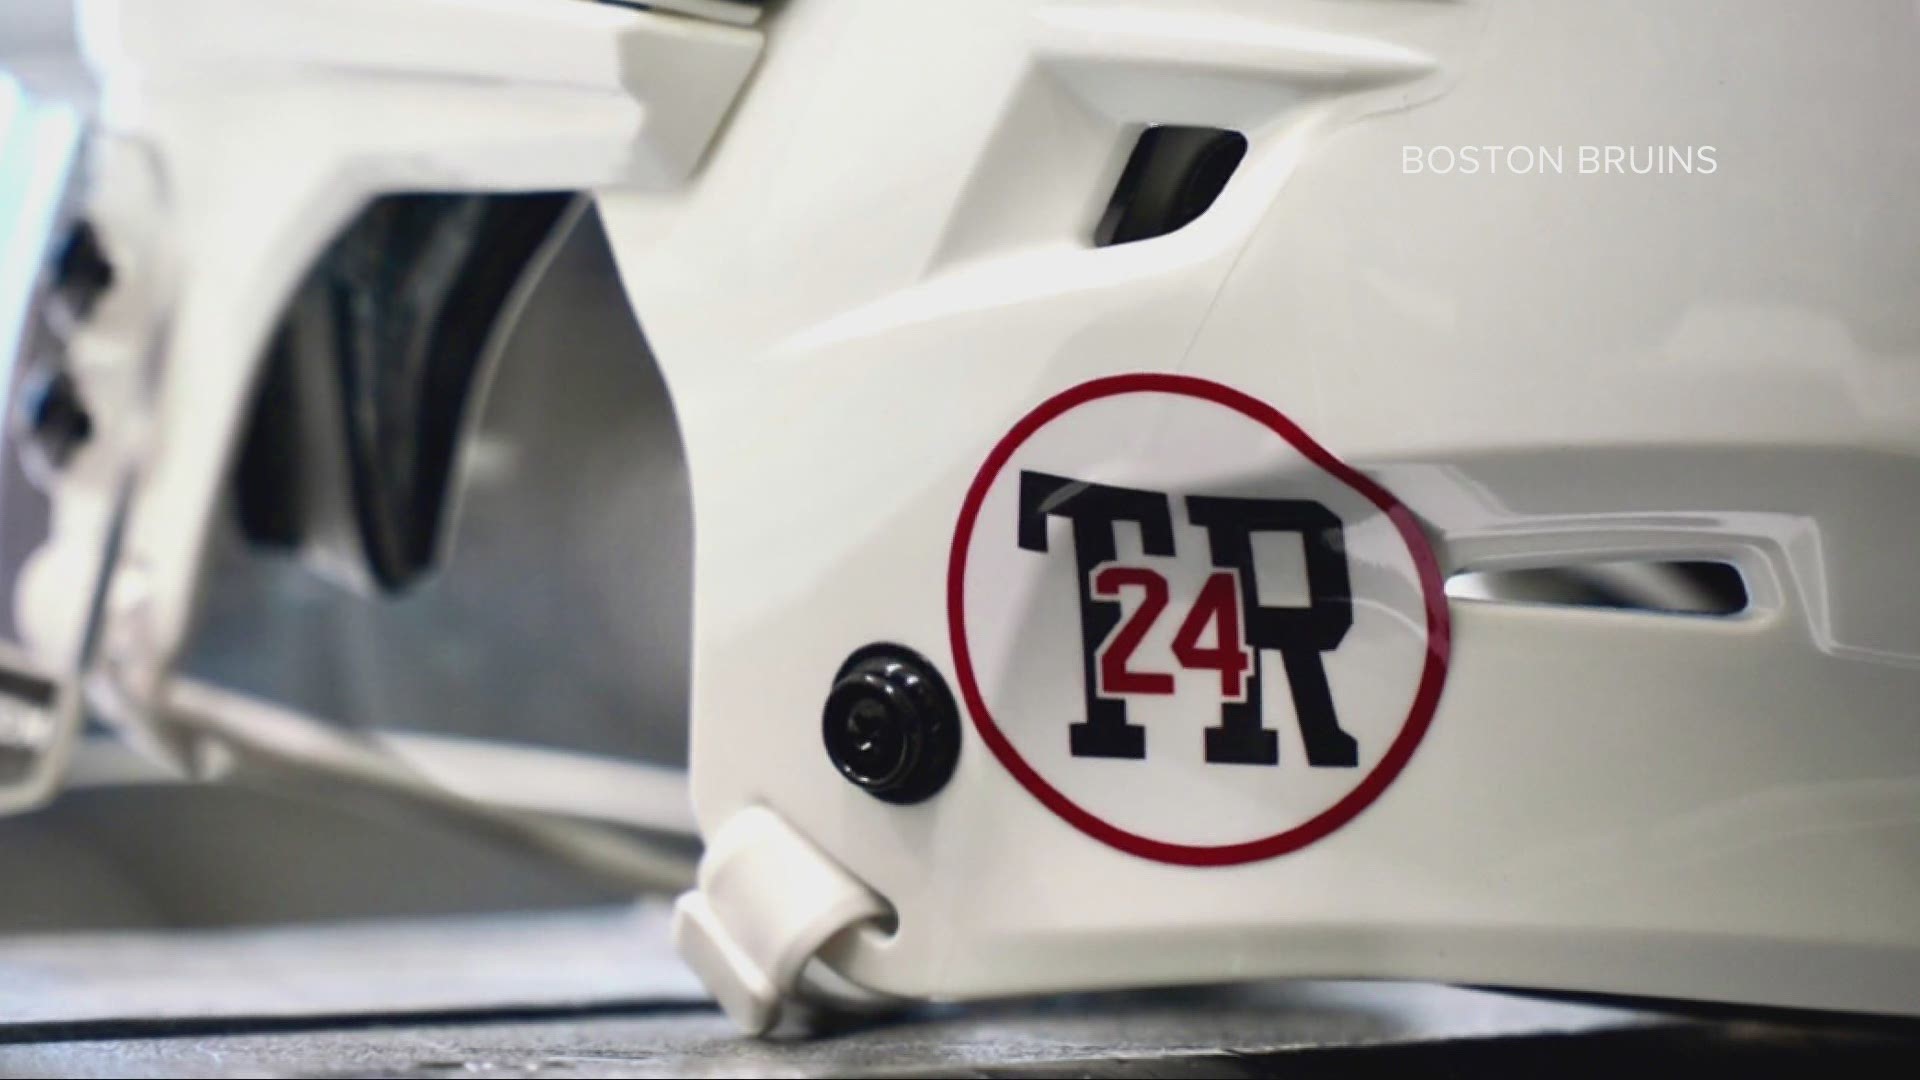 The Boston Bruins are just one of several New England hockey teams who are honoring the late Travis Roy this season.